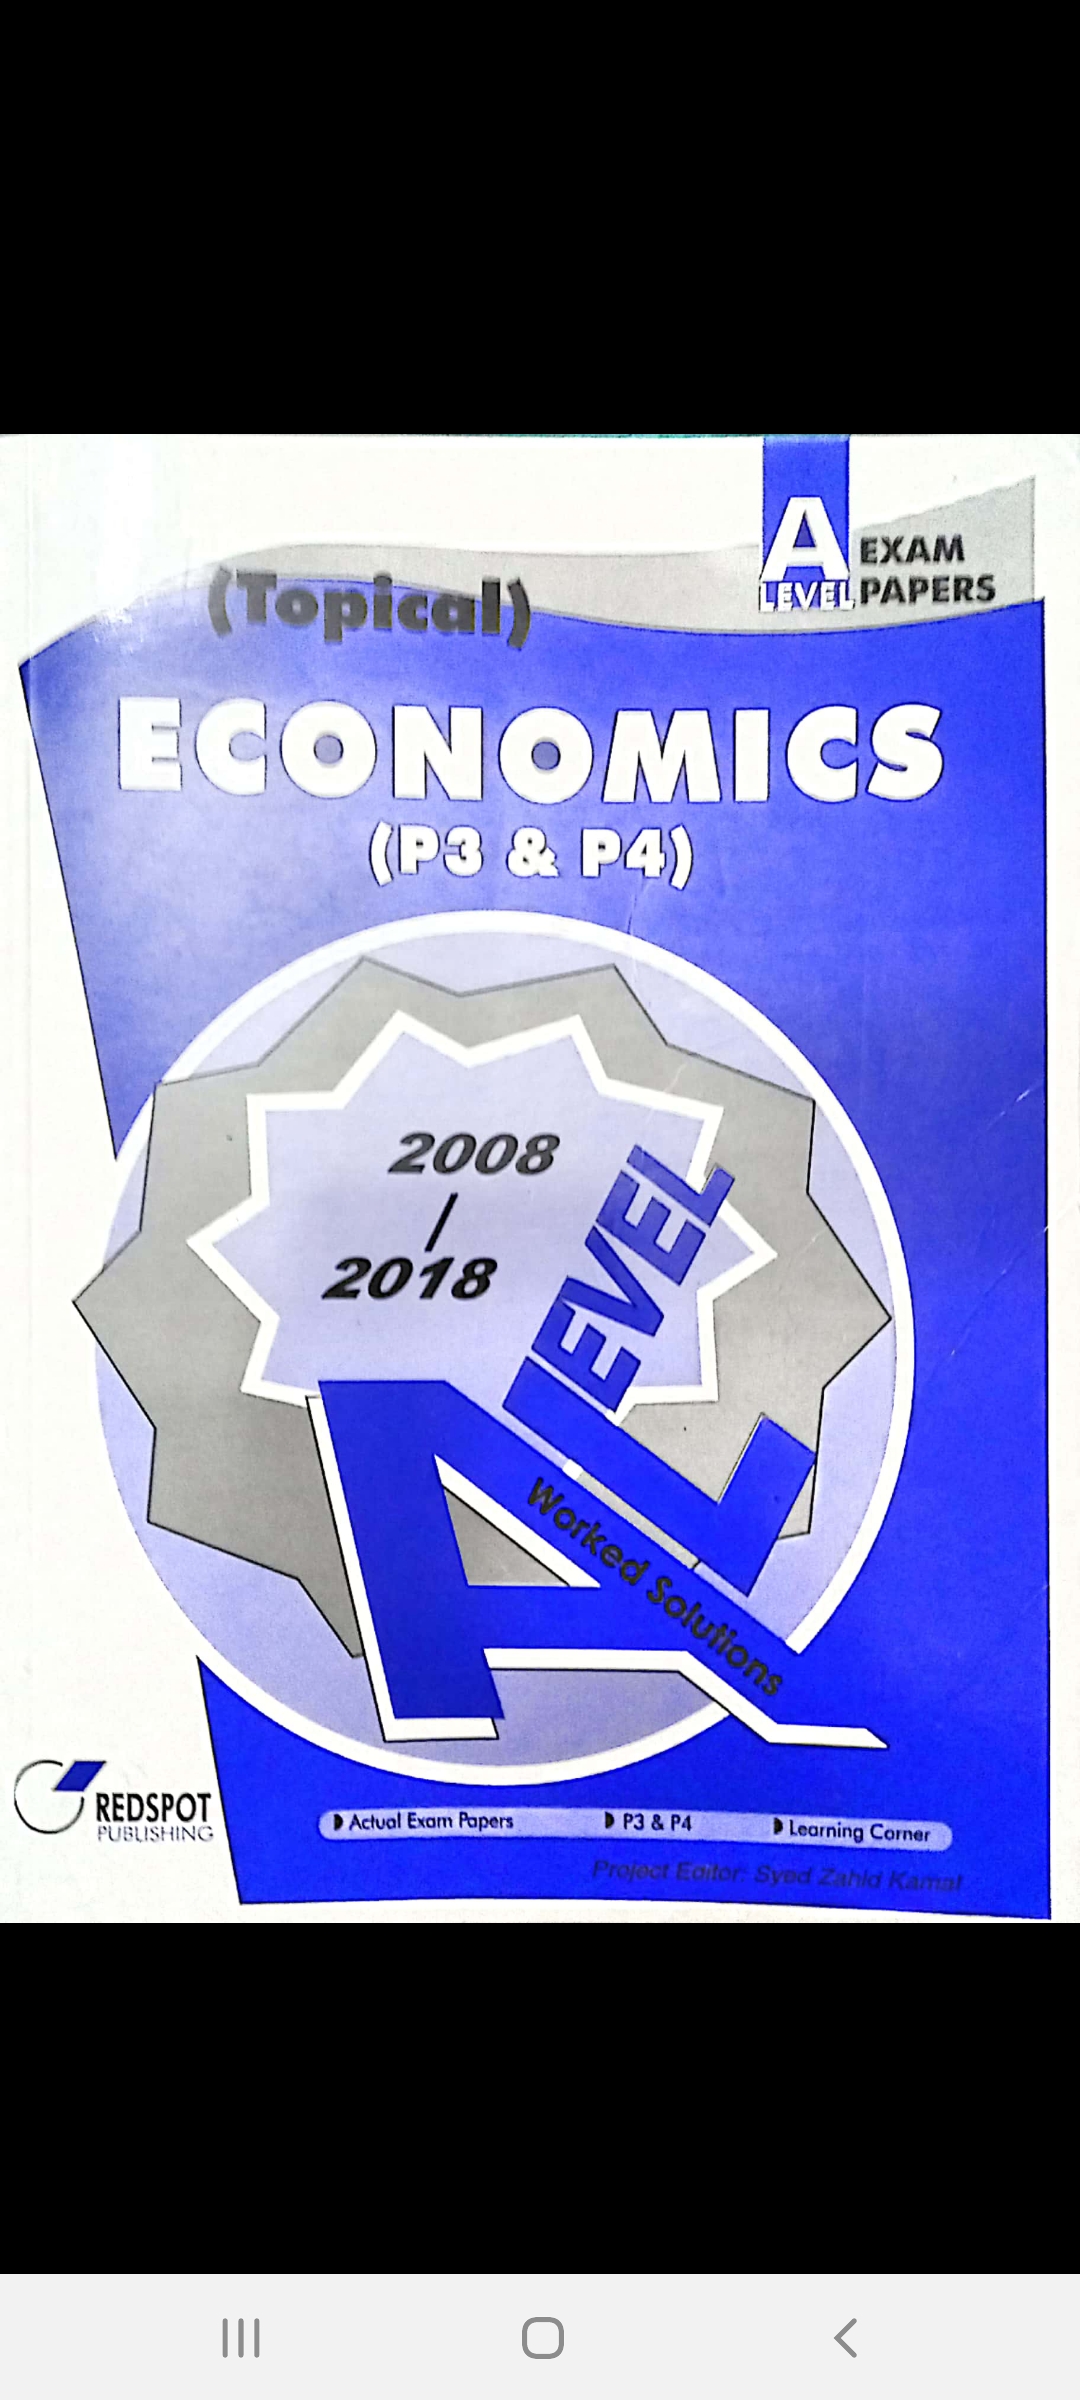 (topical) economics (p3 and p4) a level exam papers